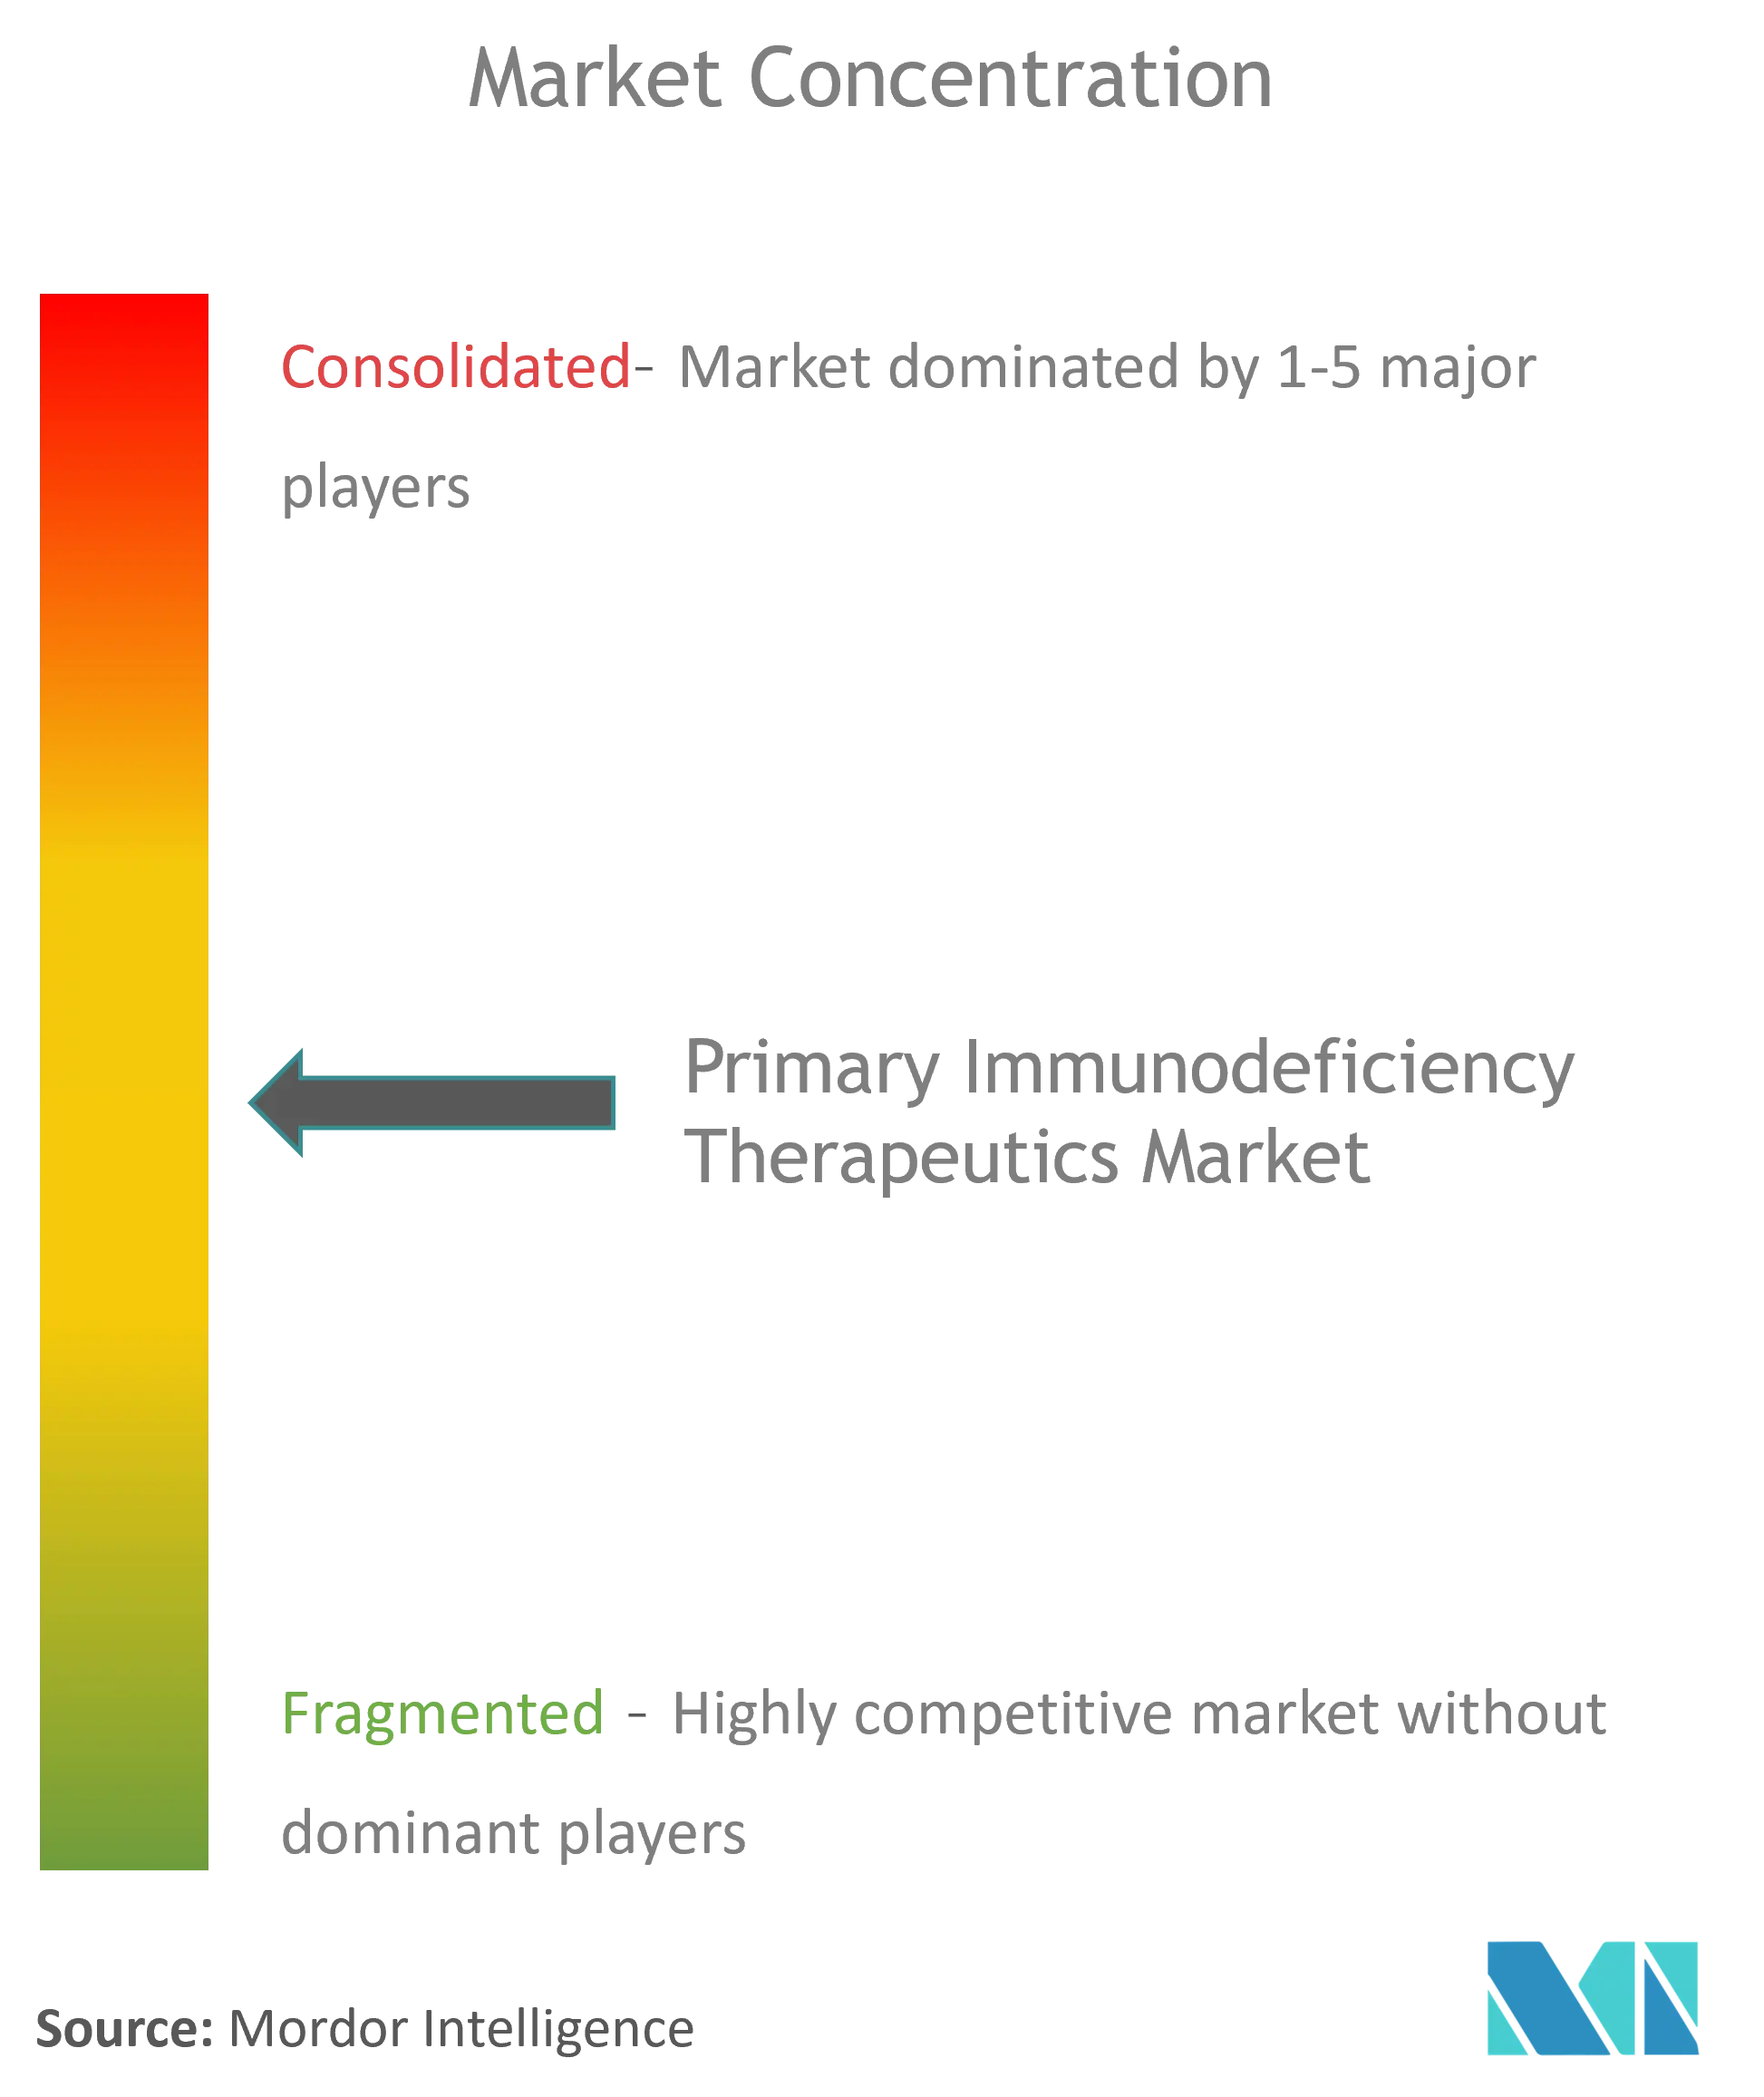 Global Primary Immunodeficiency Therapeutics Market Concentration